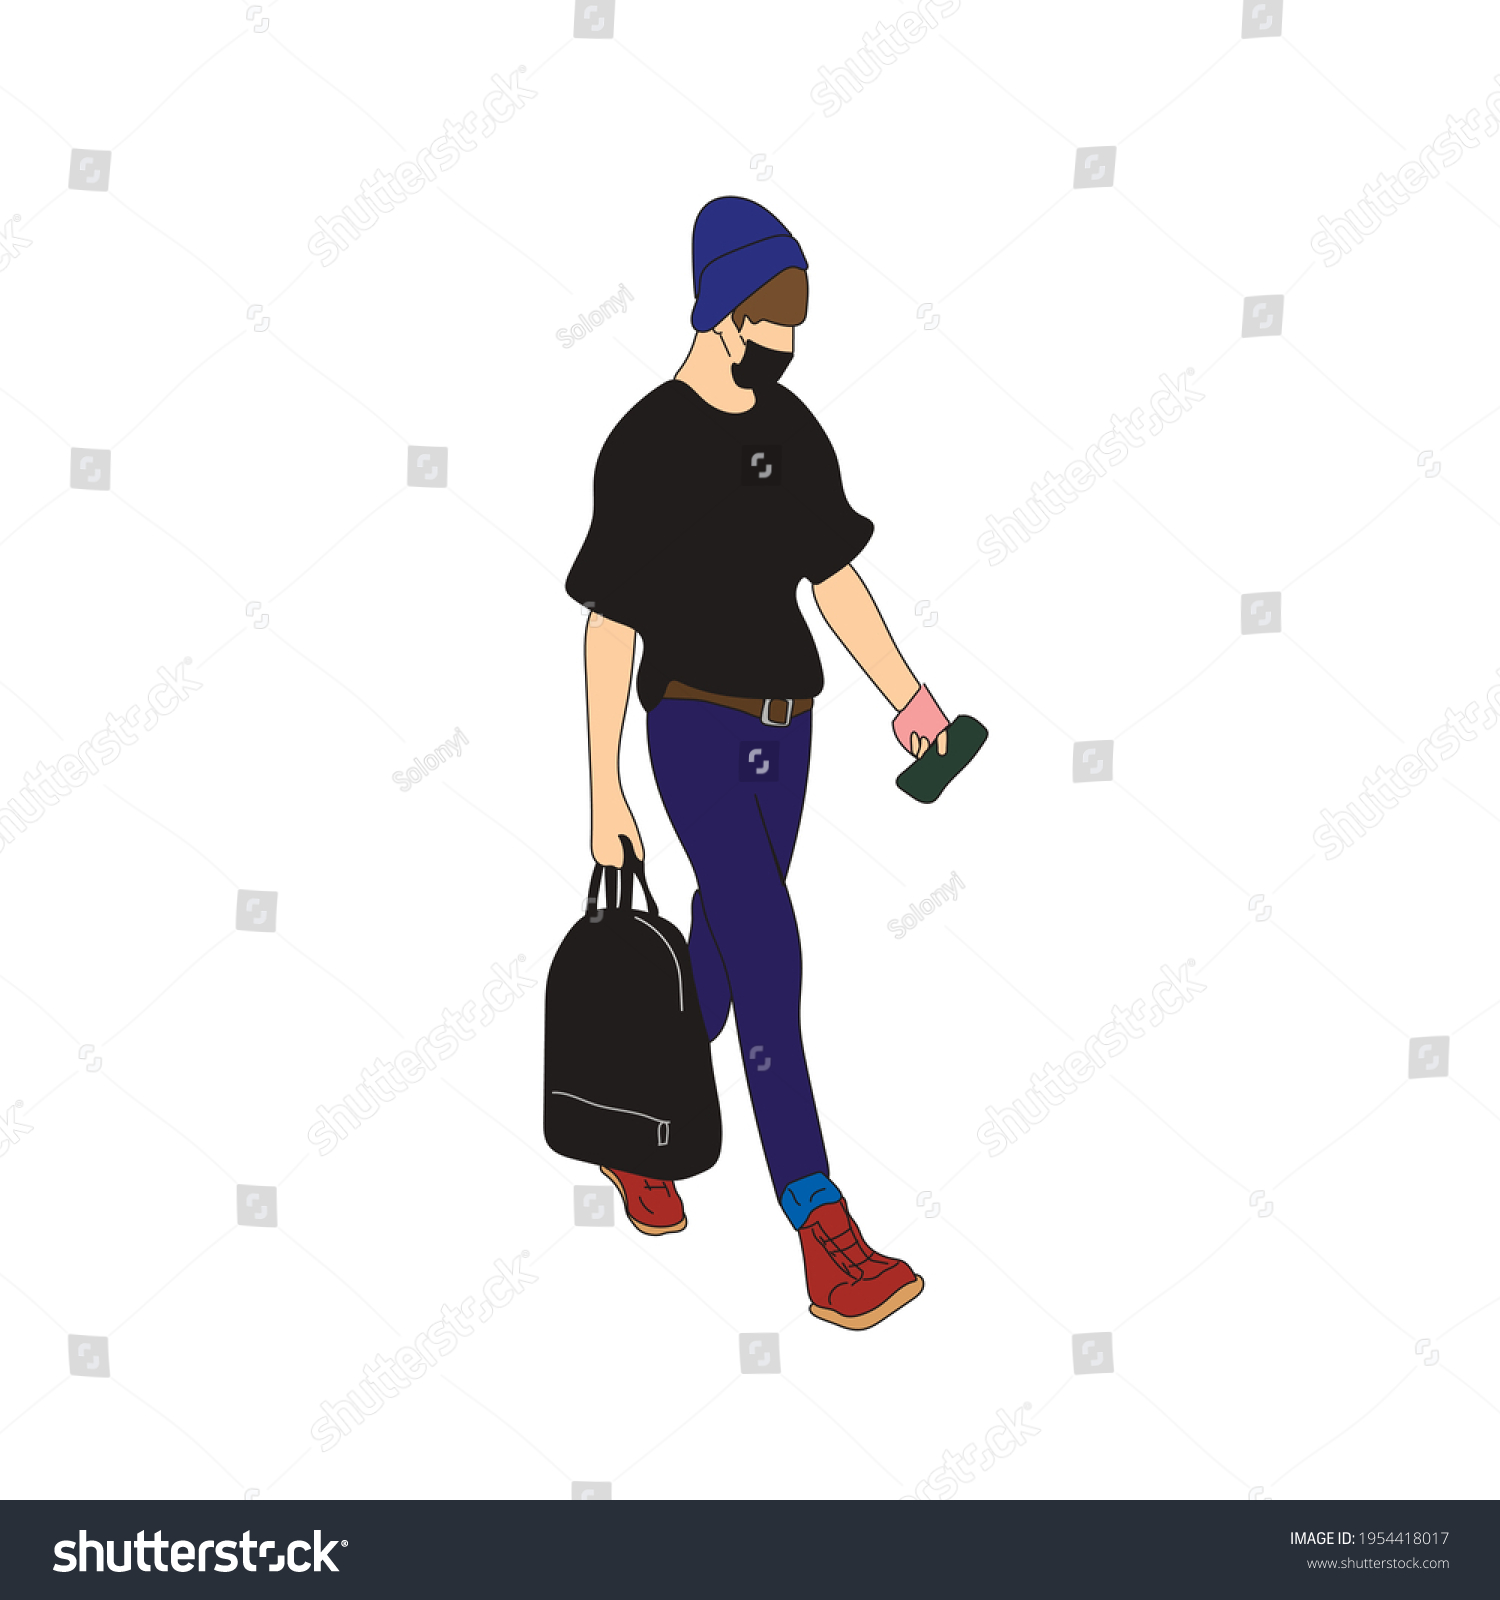 SVG of Vector illustration of Kpop street fashion. Street idols of Koreans. Kpop male idol fashion. A guy in blue jeans and a black T-shirt and carrying a black bag. svg